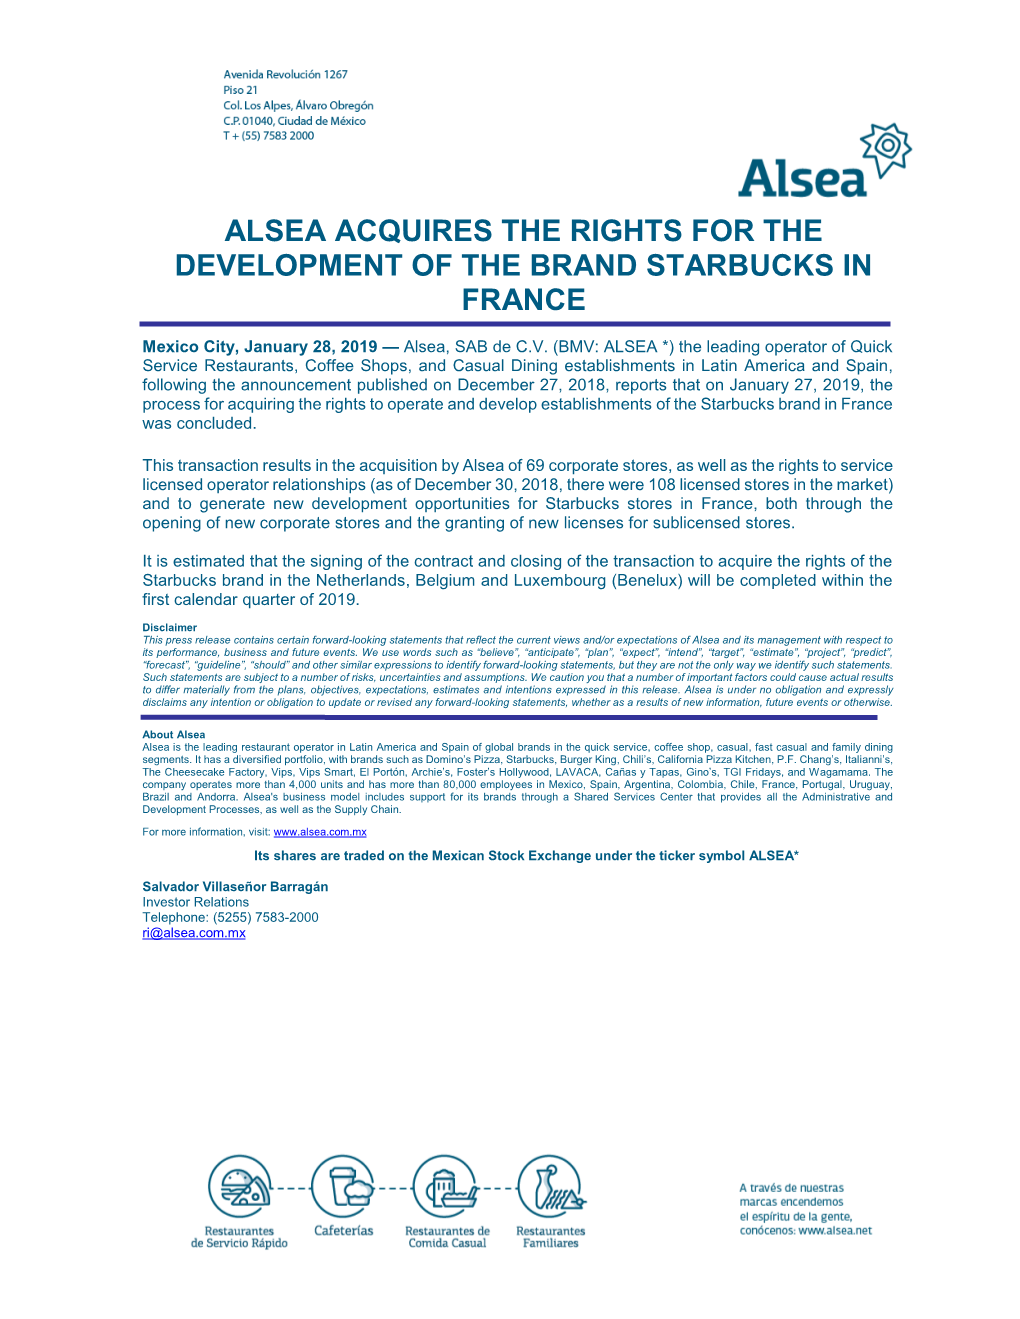 Alsea Acquires the Rights for the Development of the Brand Starbucks in France